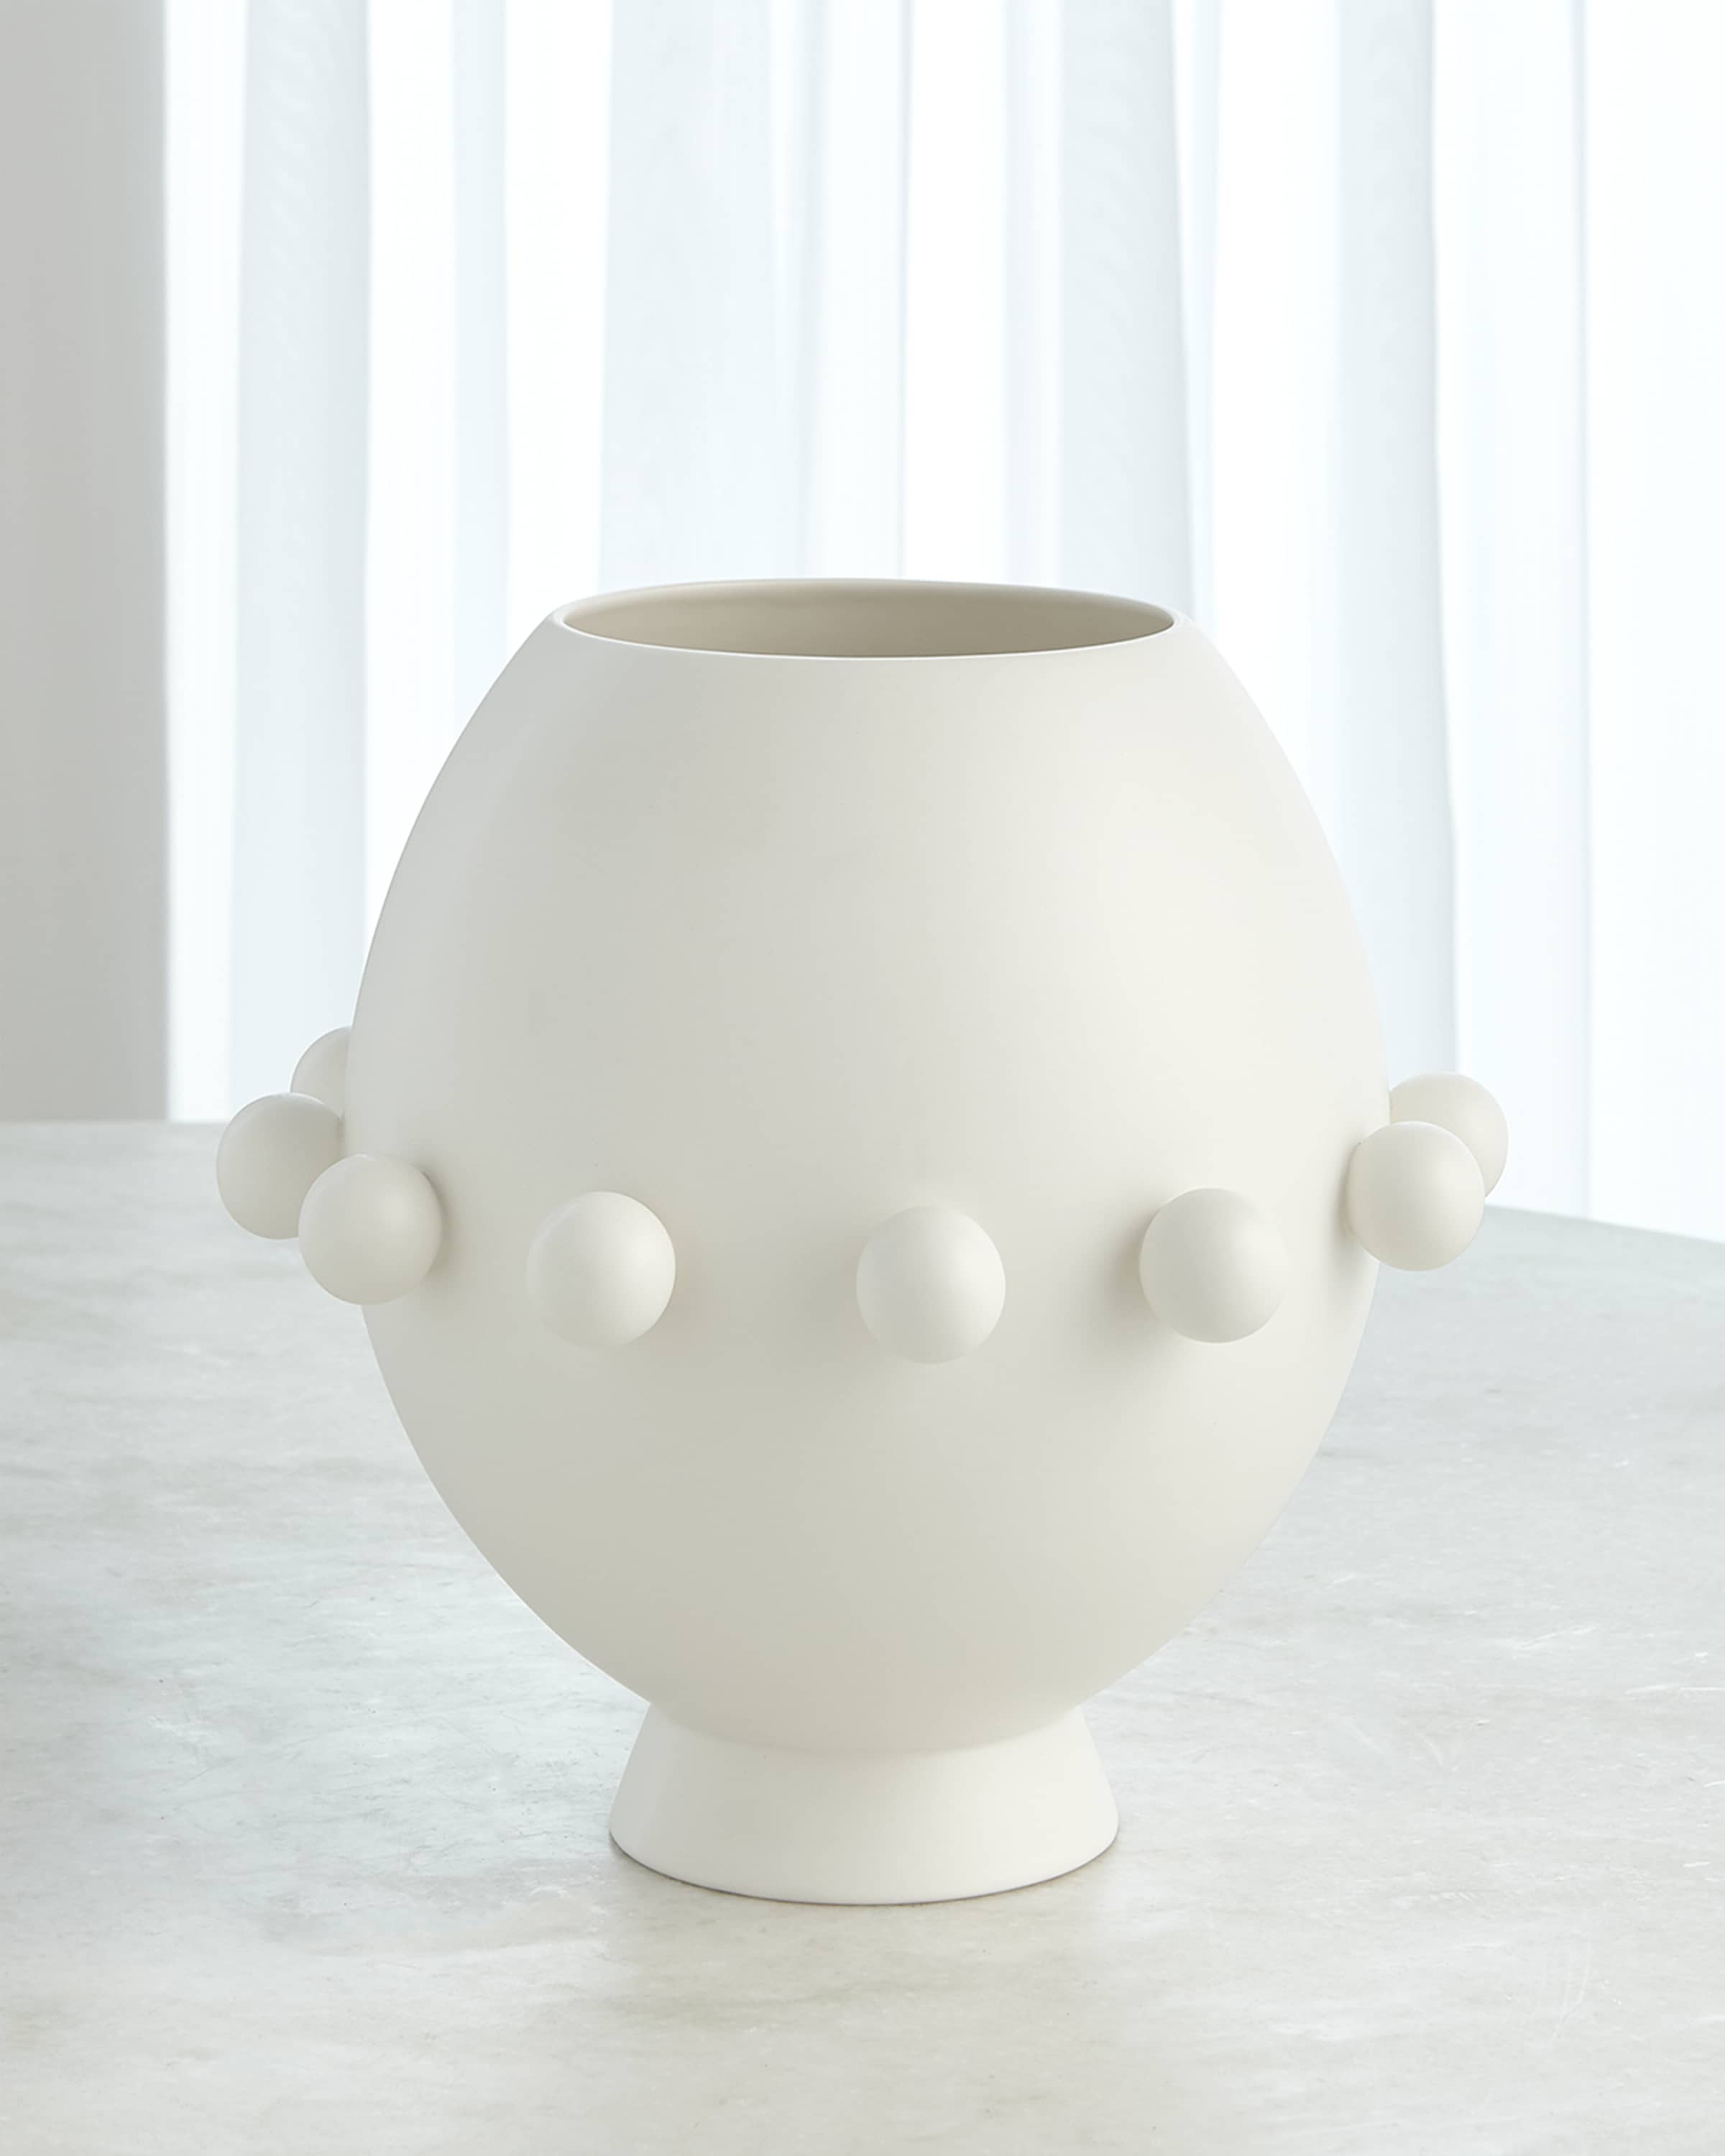 Ashley Childers for Global Views Spheres Collection Vase I